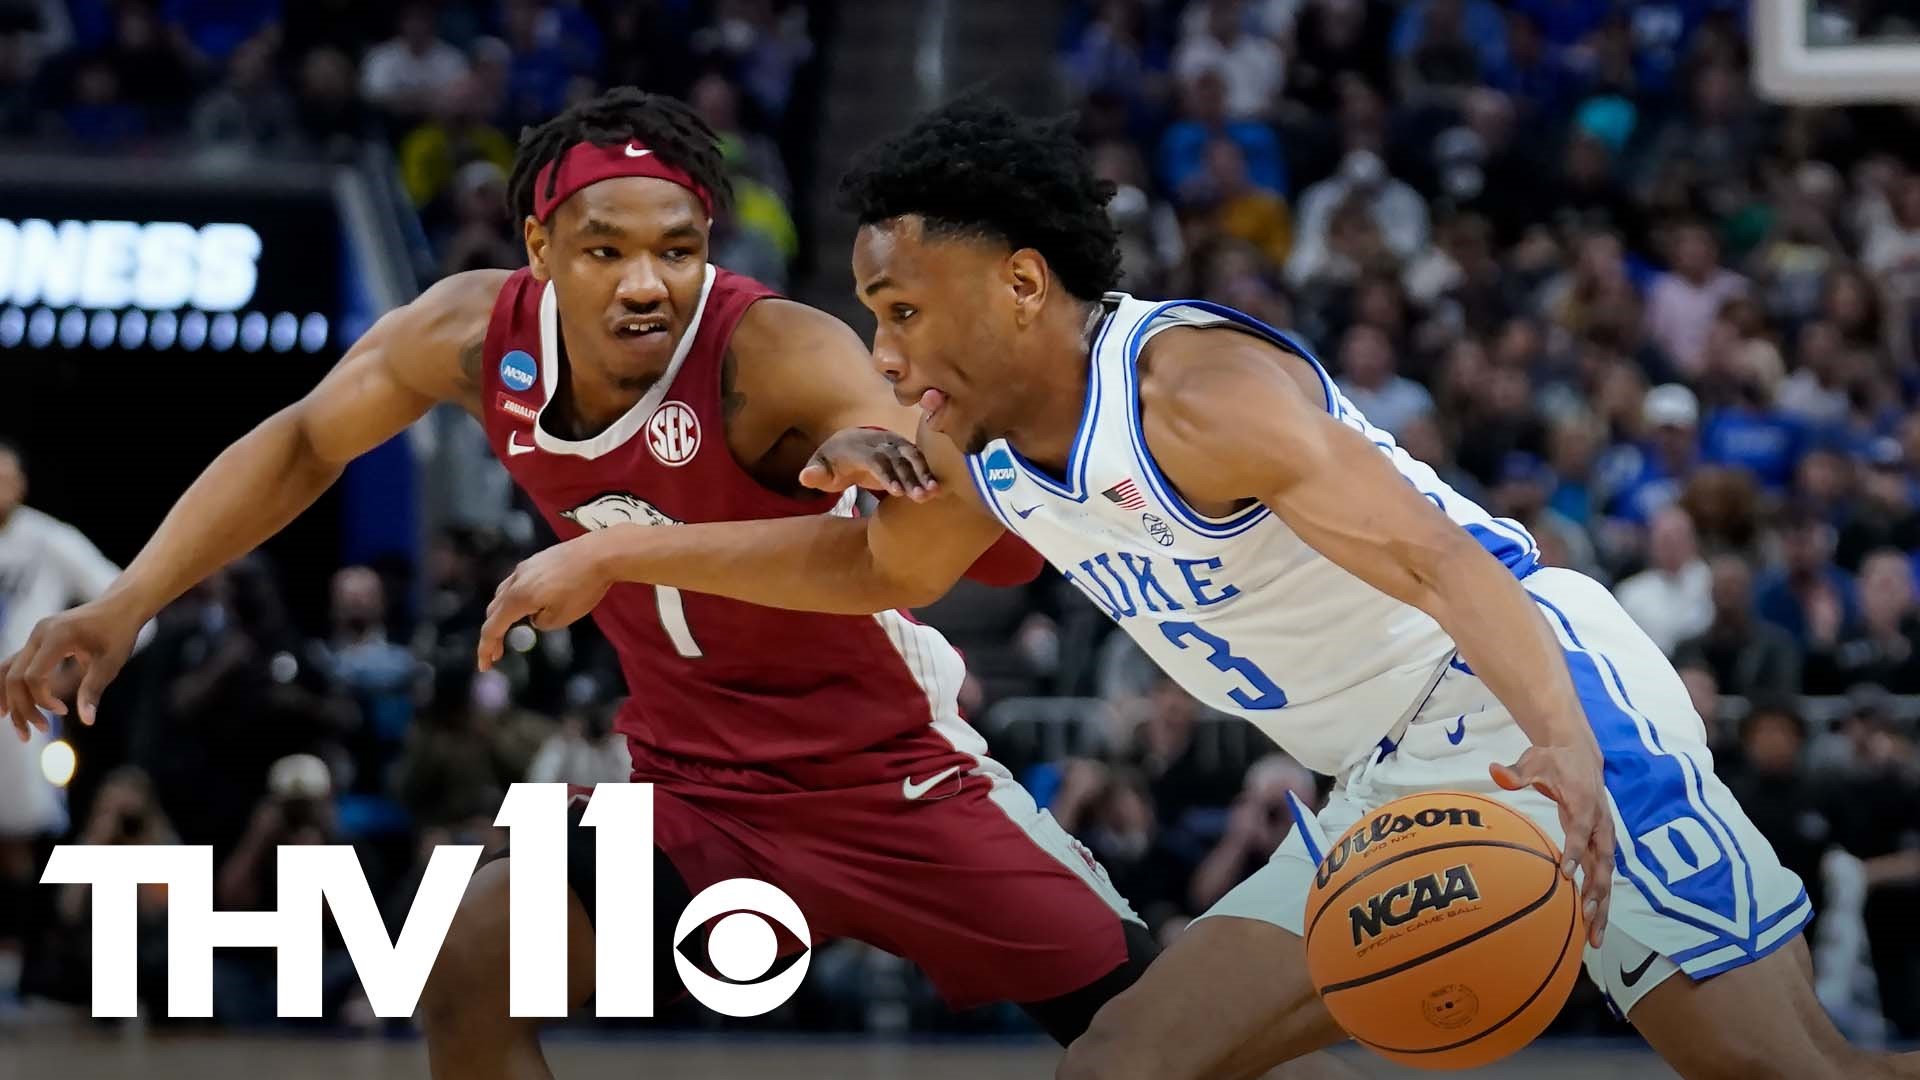 The Hogs came up short against the Duke Blue Devils Saturday night, 78-69, as the Razorbacks' season comes to an end.